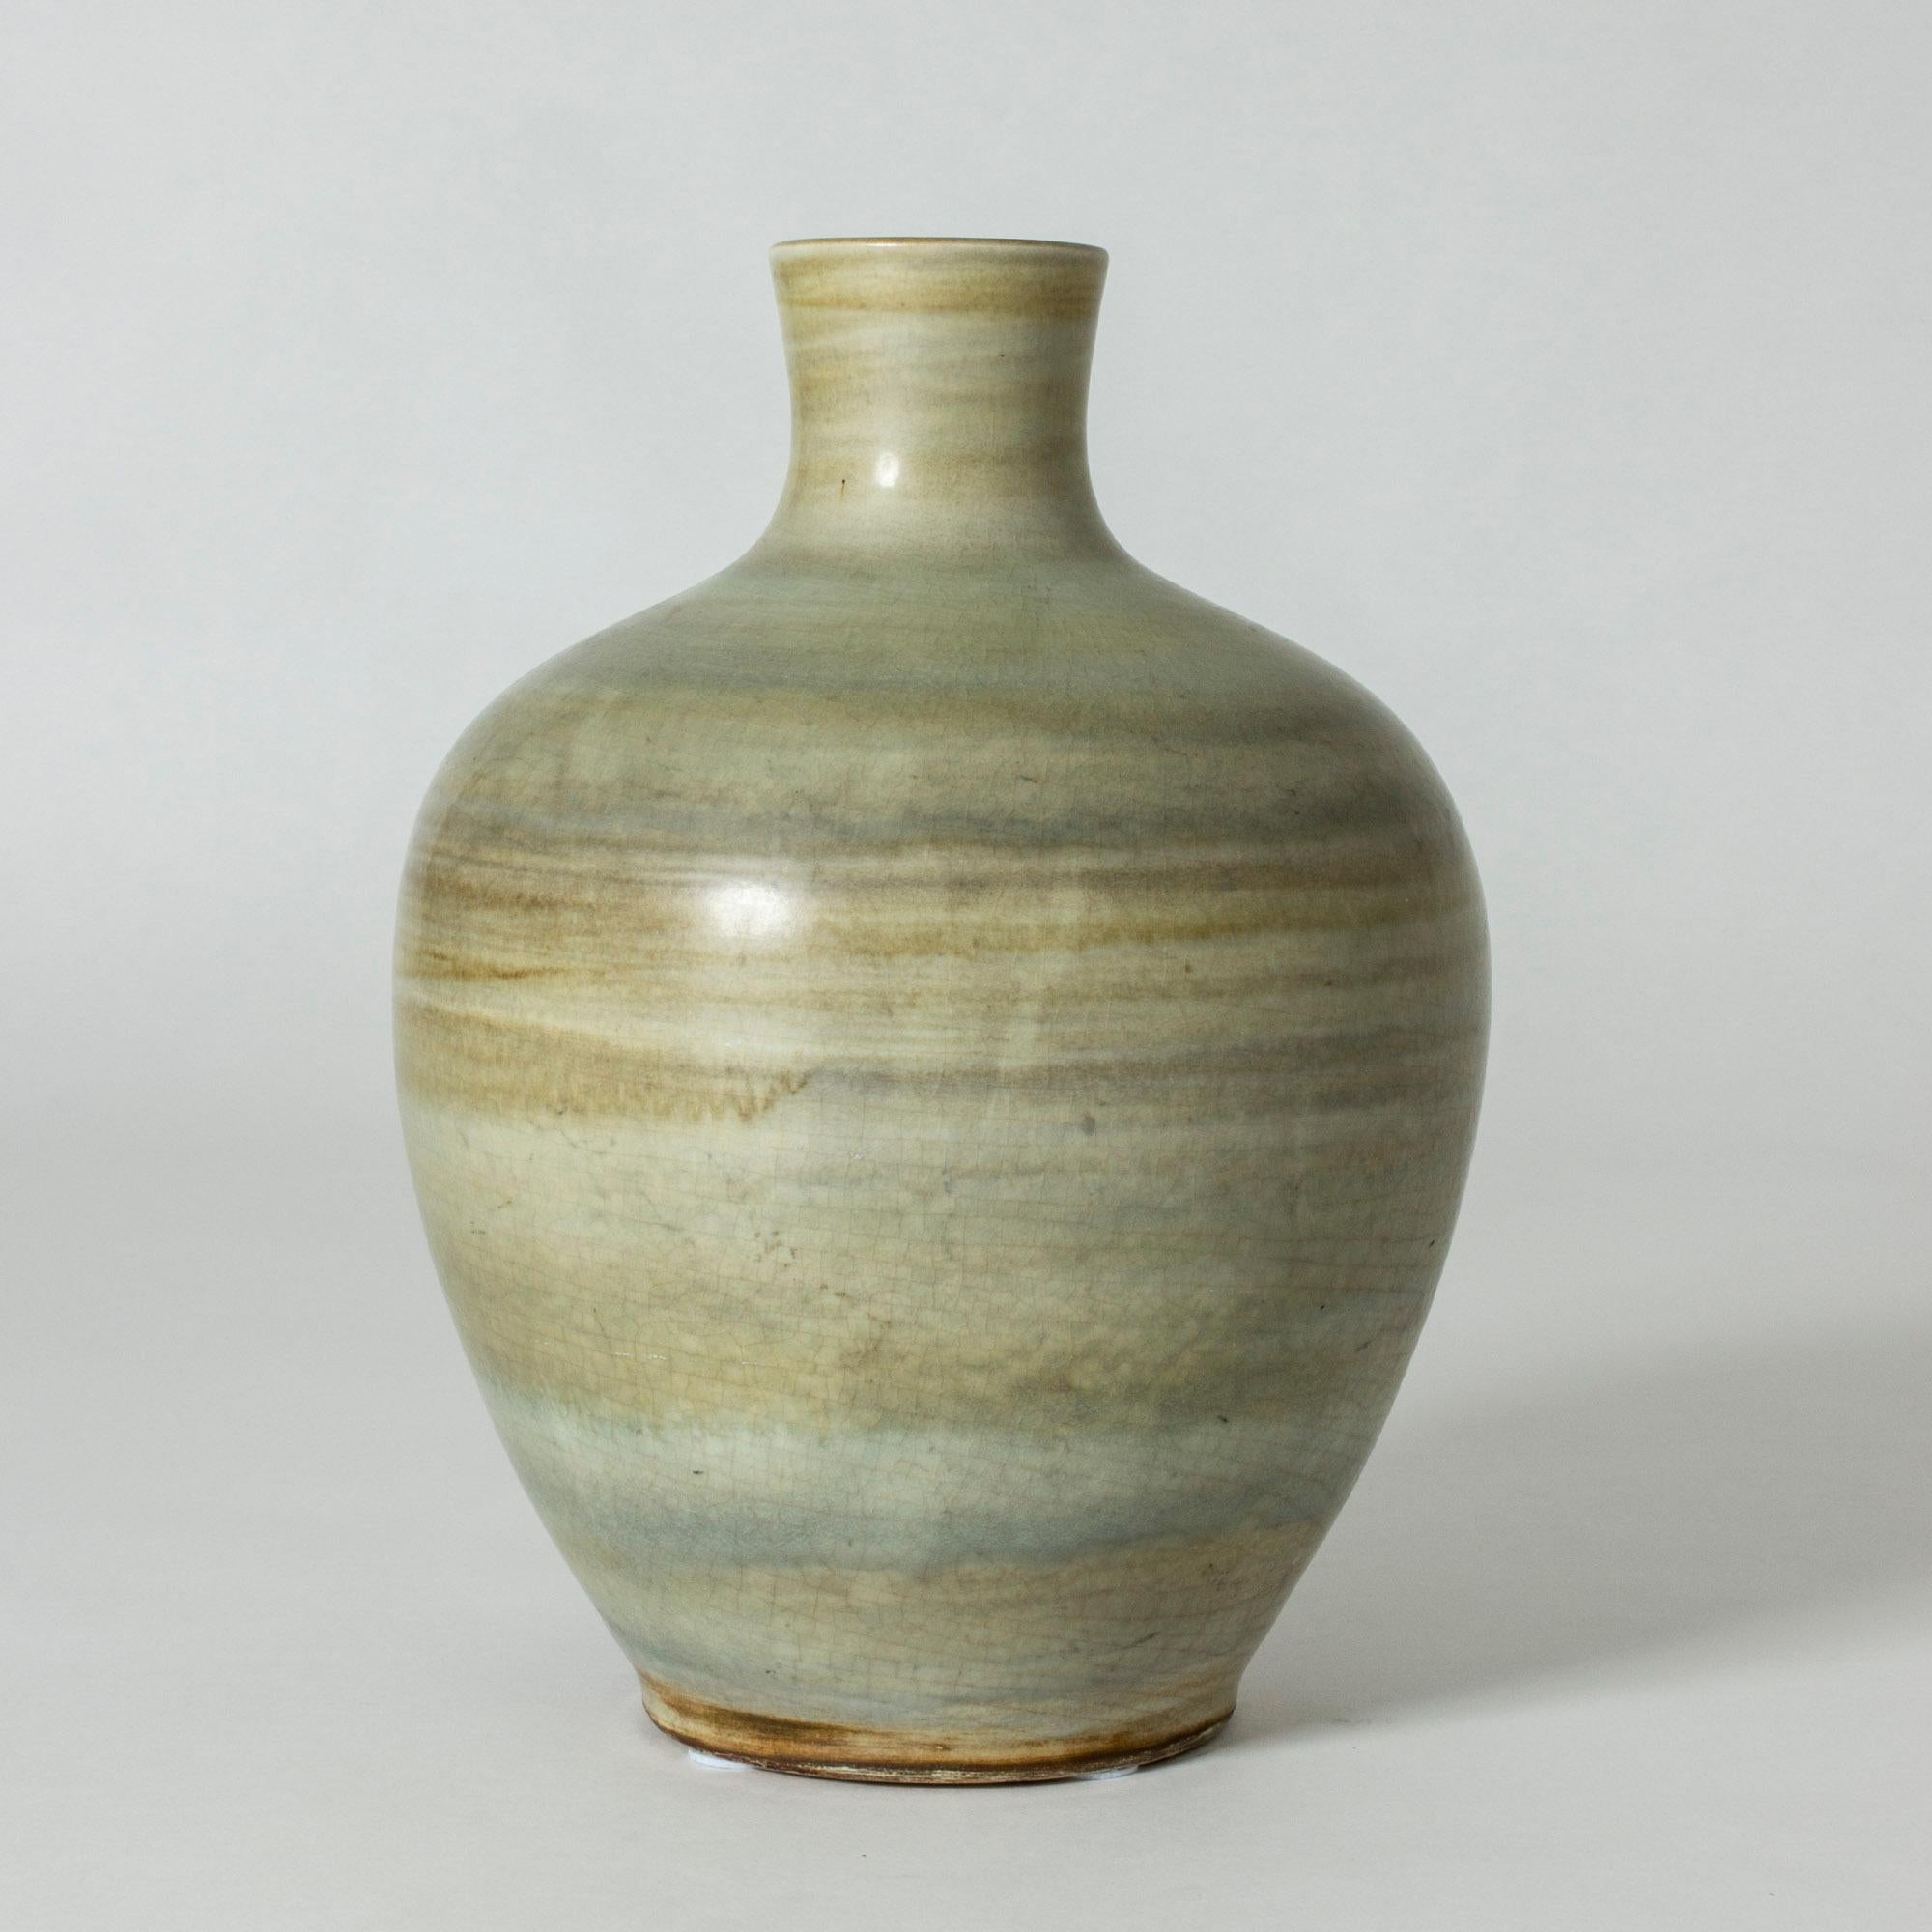 Stoneware floor vase by Gertrud Lönegren. Beautiful, subdued tones of nature grey and yellow in broad, diluted strokes around the body.